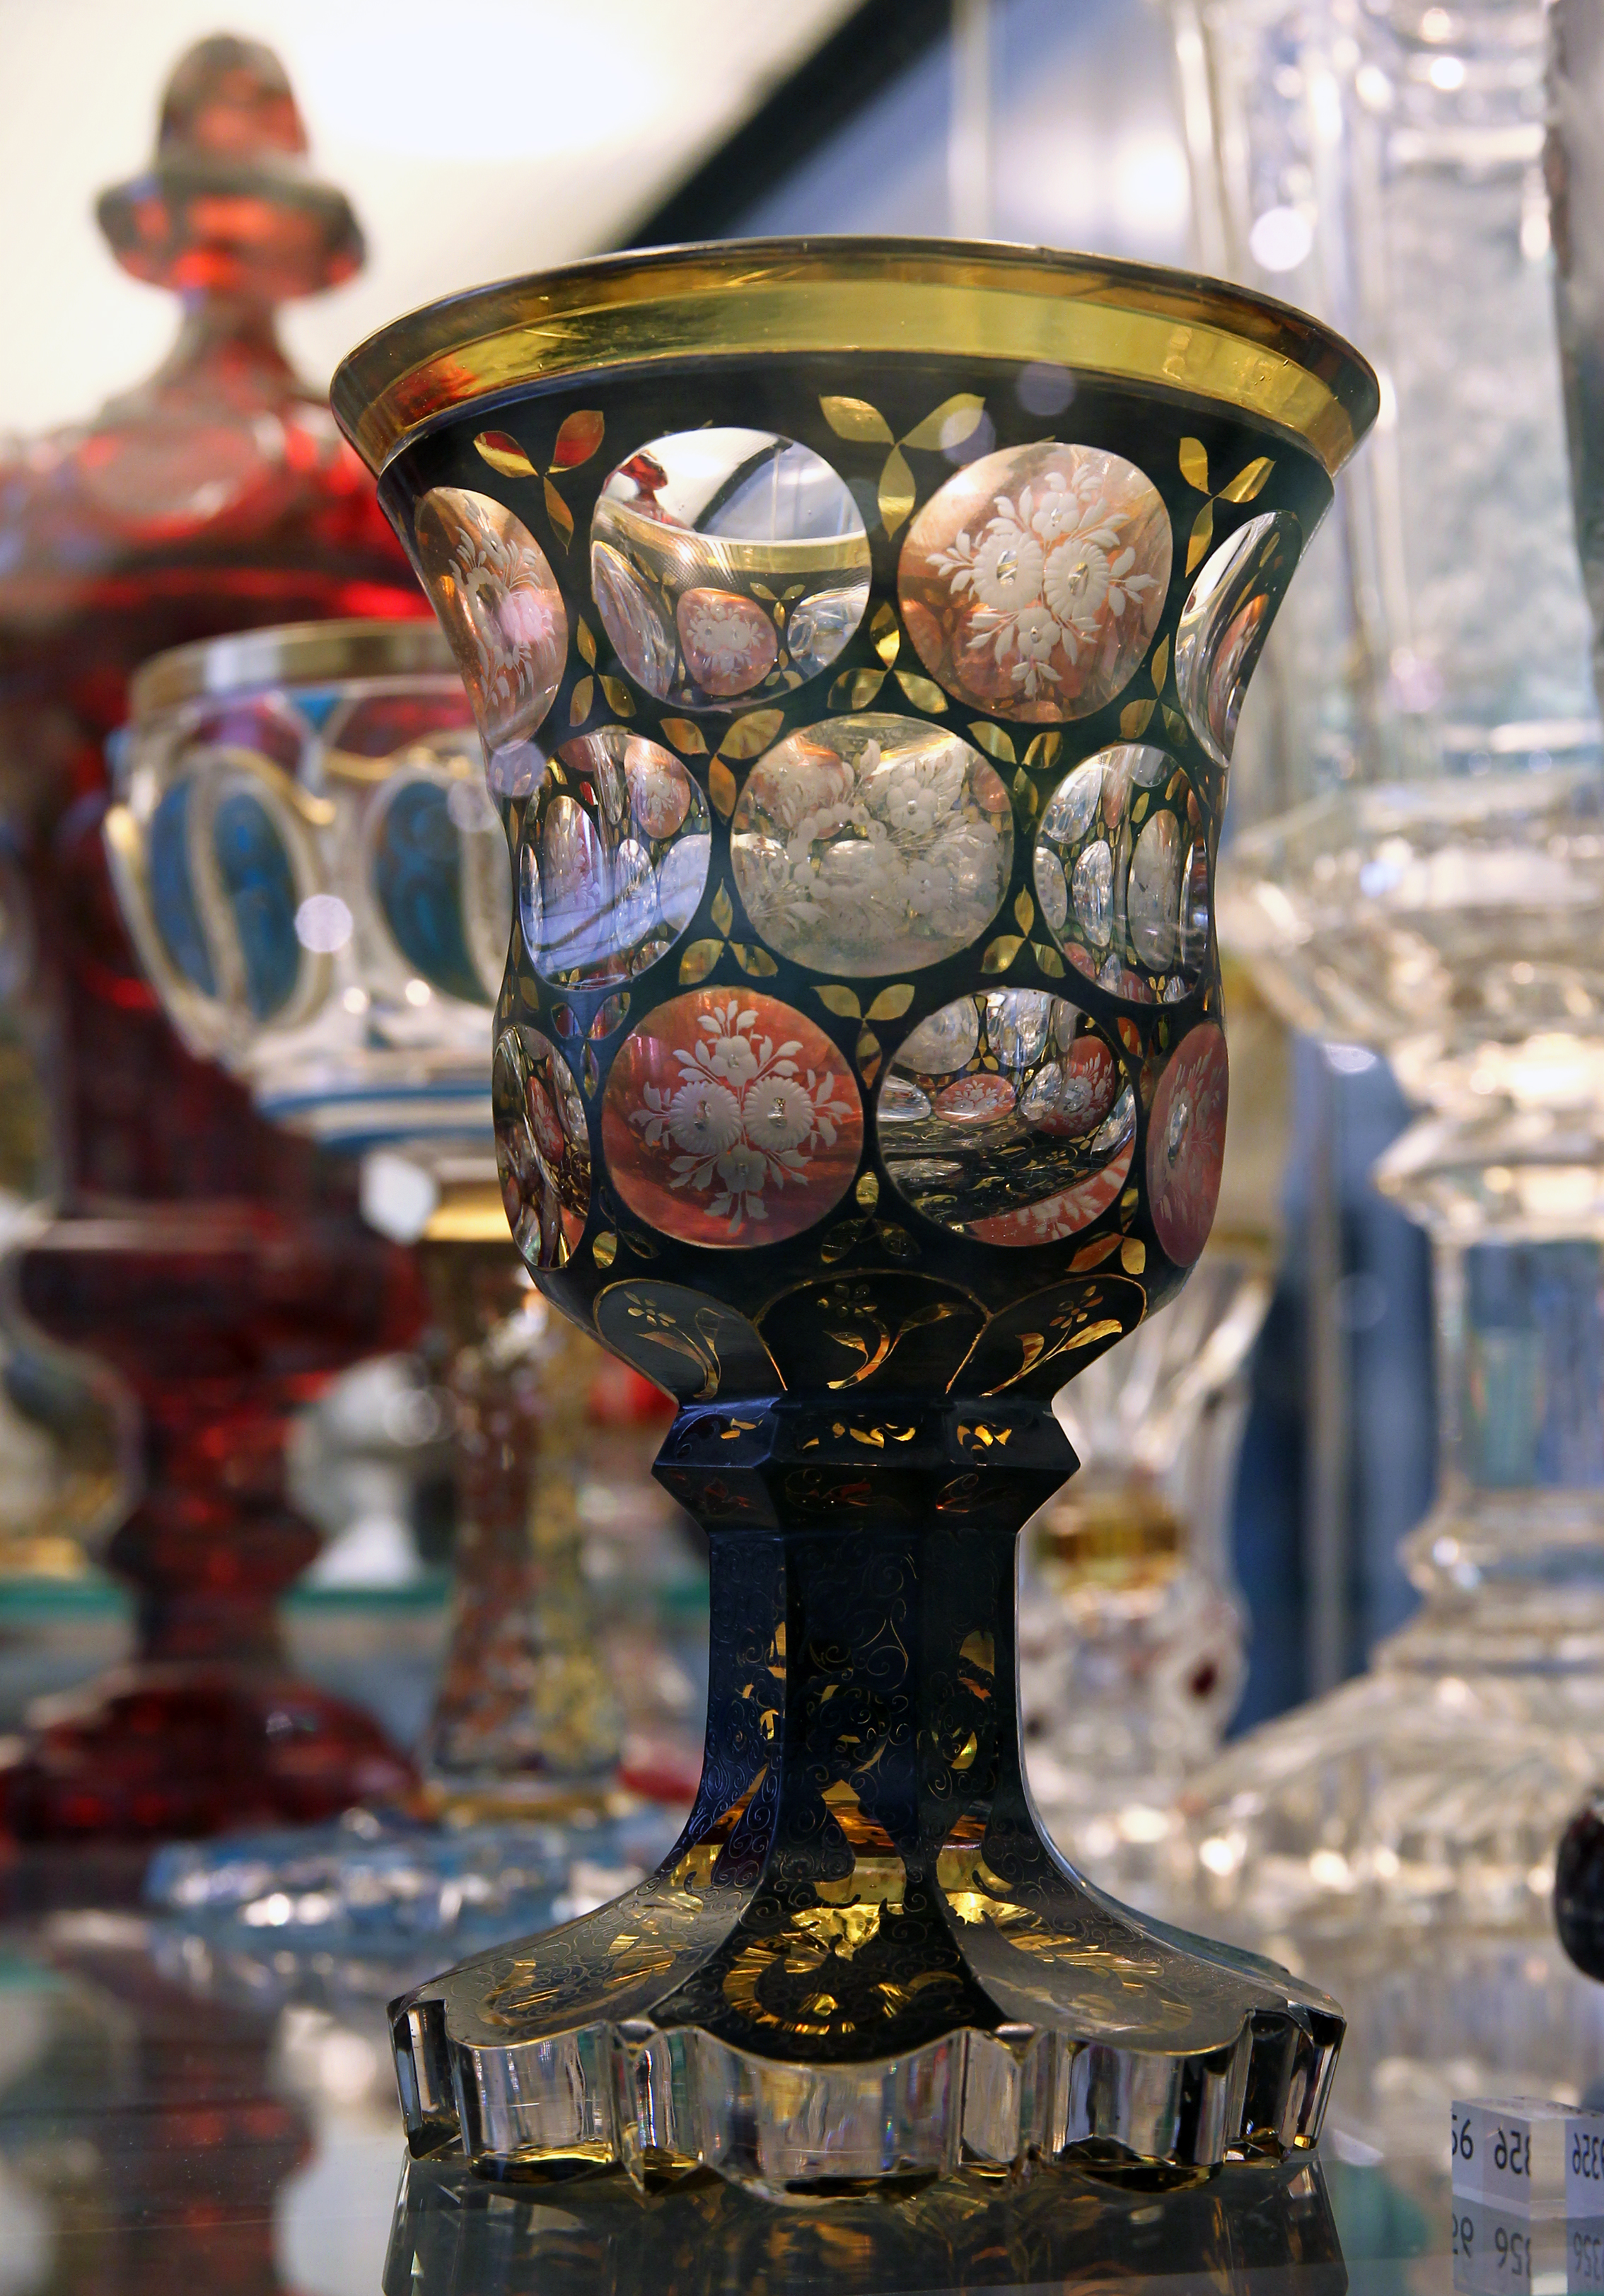 Exquisite Techniques: Revealing the Artistry Behind Bohemian Glass